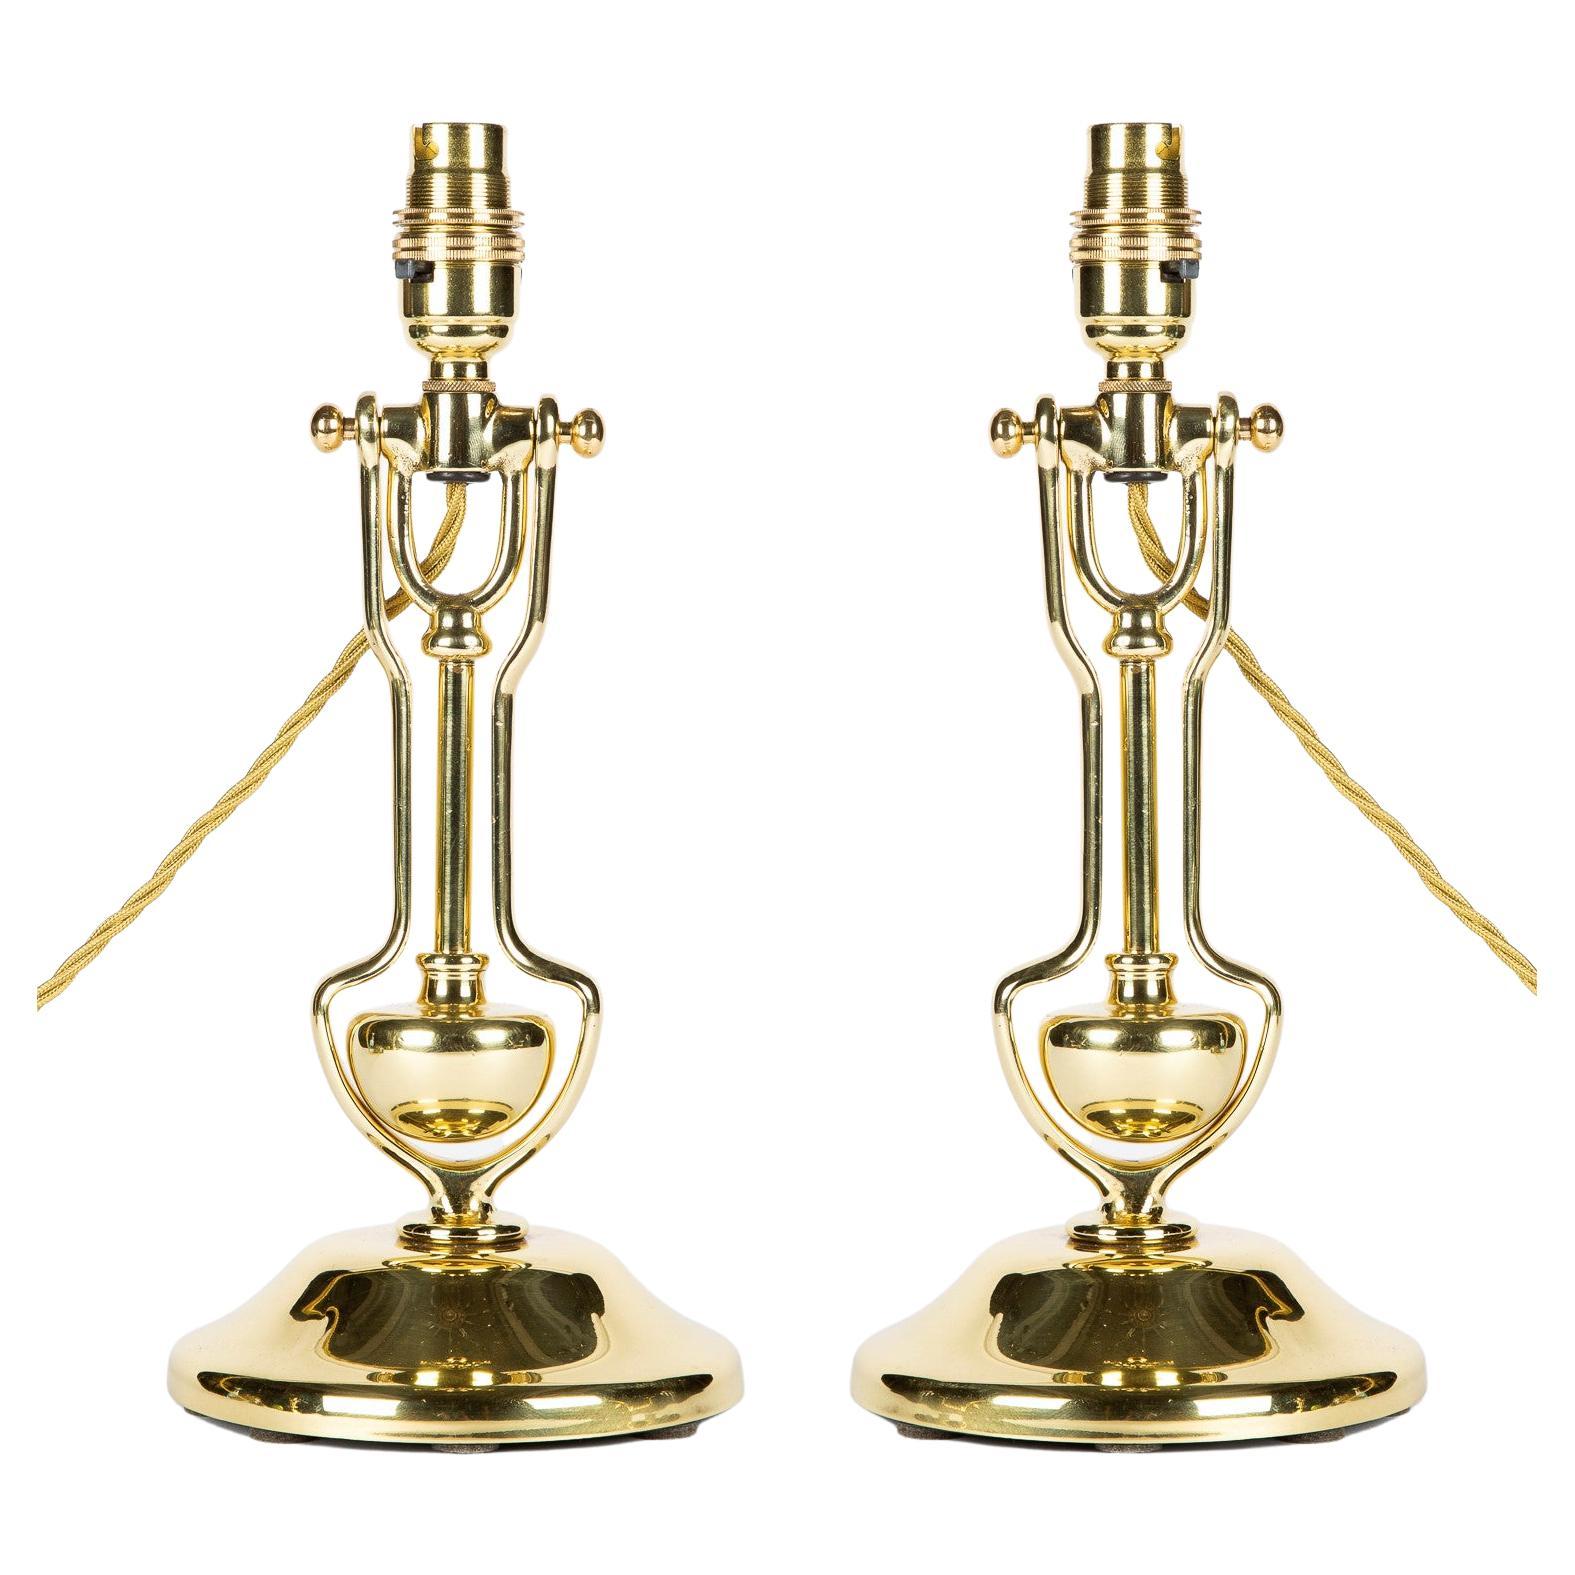 Pair of Royal Navy Brass Gimbal Cabin Lights by McGeoch & Co.